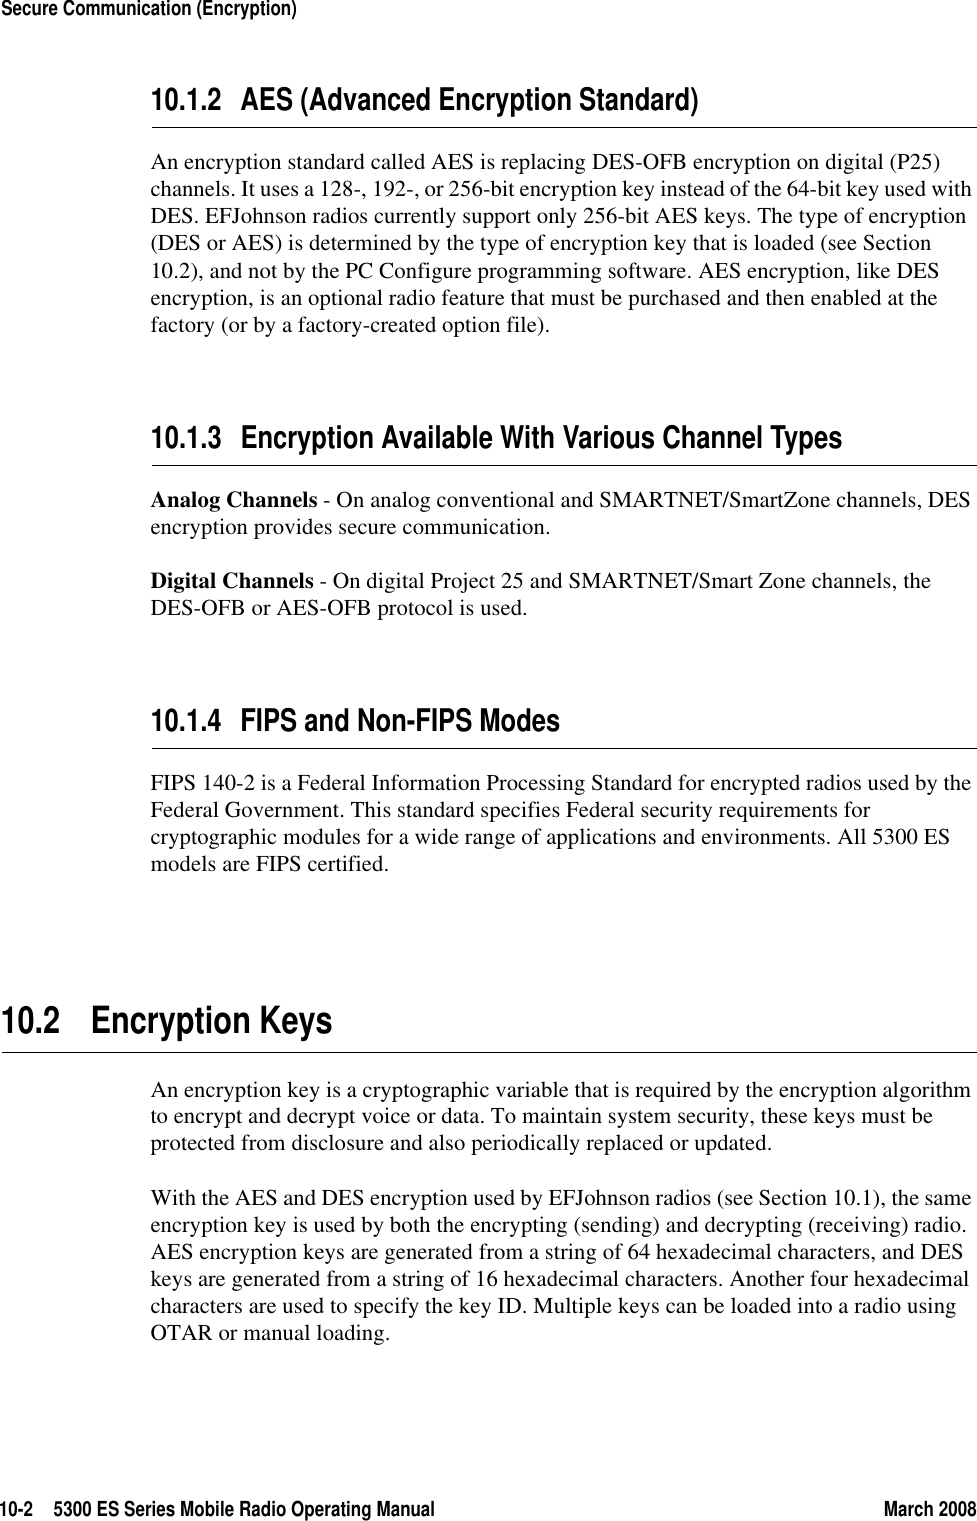 10-2 5300 ES Series Mobile Radio Operating Manual March 2008Secure Communication (Encryption)10.1.2 AES (Advanced Encryption Standard)An encryption standard called AES is replacing DES-OFB encryption on digital (P25) channels. It uses a 128-, 192-, or 256-bit encryption key instead of the 64-bit key used with DES. EFJohnson radios currently support only 256-bit AES keys. The type of encryption (DES or AES) is determined by the type of encryption key that is loaded (see Section 10.2), and not by the PC Configure programming software. AES encryption, like DES encryption, is an optional radio feature that must be purchased and then enabled at the factory (or by a factory-created option file).10.1.3 Encryption Available With Various Channel TypesAnalog Channels - On analog conventional and SMARTNET/SmartZone channels, DES encryption provides secure communication.Digital Channels - On digital Project 25 and SMARTNET/Smart Zone channels, the DES-OFB or AES-OFB protocol is used.10.1.4 FIPS and Non-FIPS ModesFIPS 140-2 is a Federal Information Processing Standard for encrypted radios used by the Federal Government. This standard specifies Federal security requirements for cryptographic modules for a wide range of applications and environments. All 5300 ES models are FIPS certified.10.2 Encryption KeysAn encryption key is a cryptographic variable that is required by the encryption algorithm to encrypt and decrypt voice or data. To maintain system security, these keys must be protected from disclosure and also periodically replaced or updated.With the AES and DES encryption used by EFJohnson radios (see Section 10.1), the same encryption key is used by both the encrypting (sending) and decrypting (receiving) radio. AES encryption keys are generated from a string of 64 hexadecimal characters, and DES keys are generated from a string of 16 hexadecimal characters. Another four hexadecimal characters are used to specify the key ID. Multiple keys can be loaded into a radio using OTAR or manual loading.